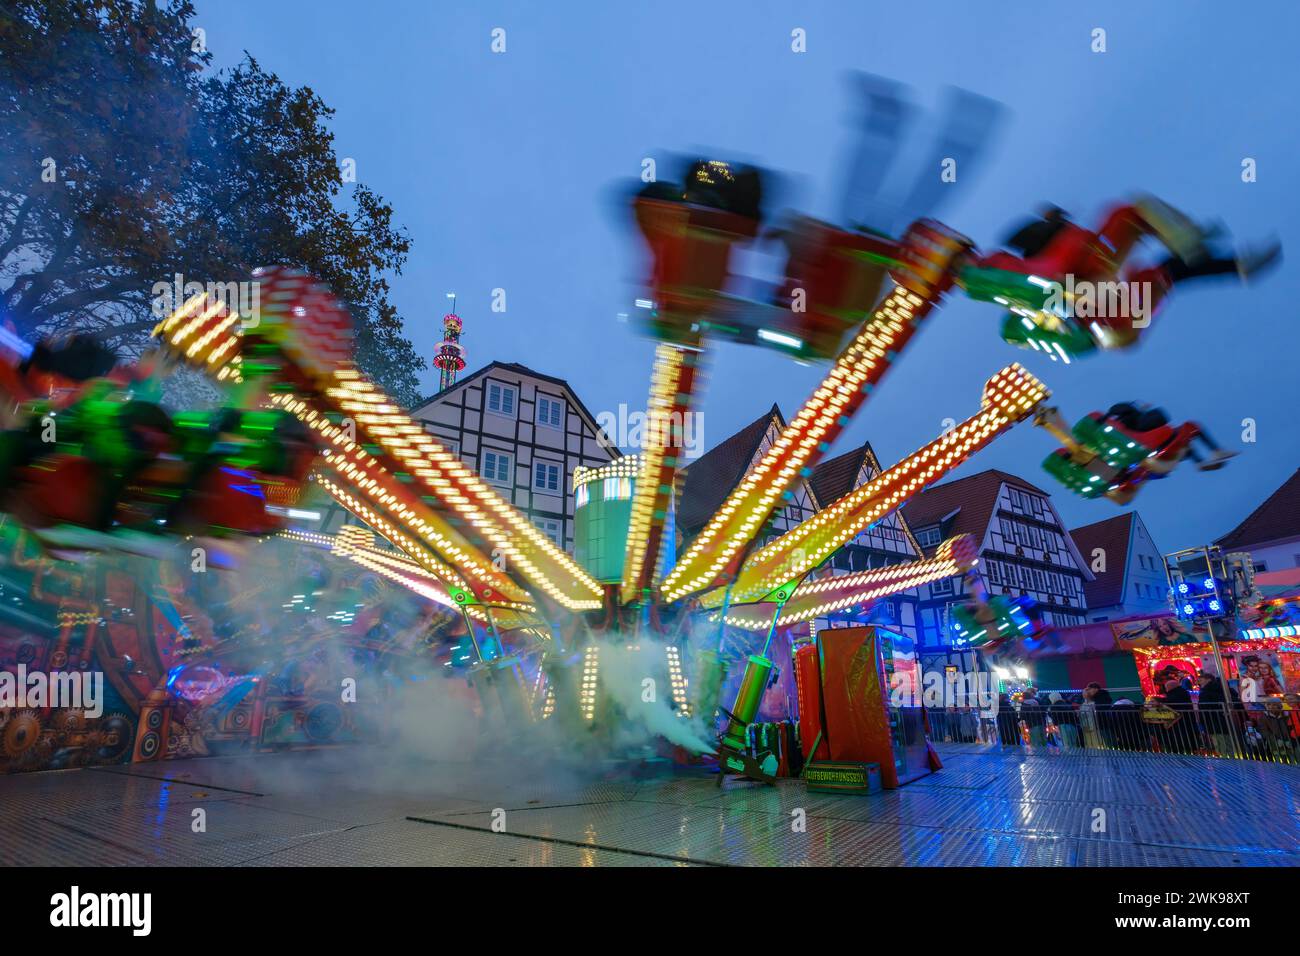 CarouselDance Jumper at the market of Soest Stock Photo